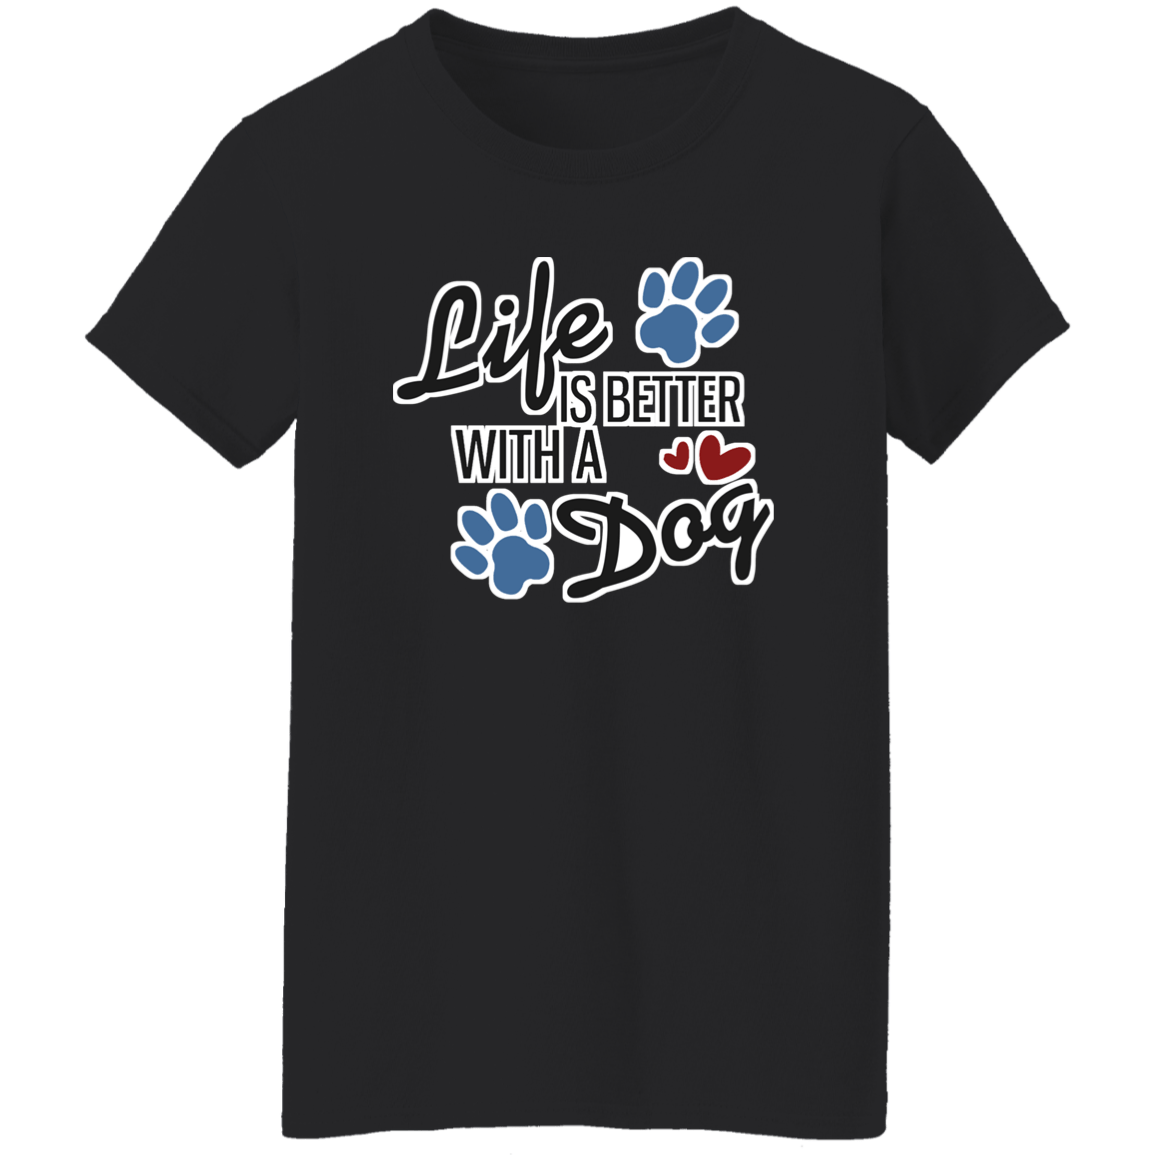 Life is Better with a Dog - Ladies T-Shirt.